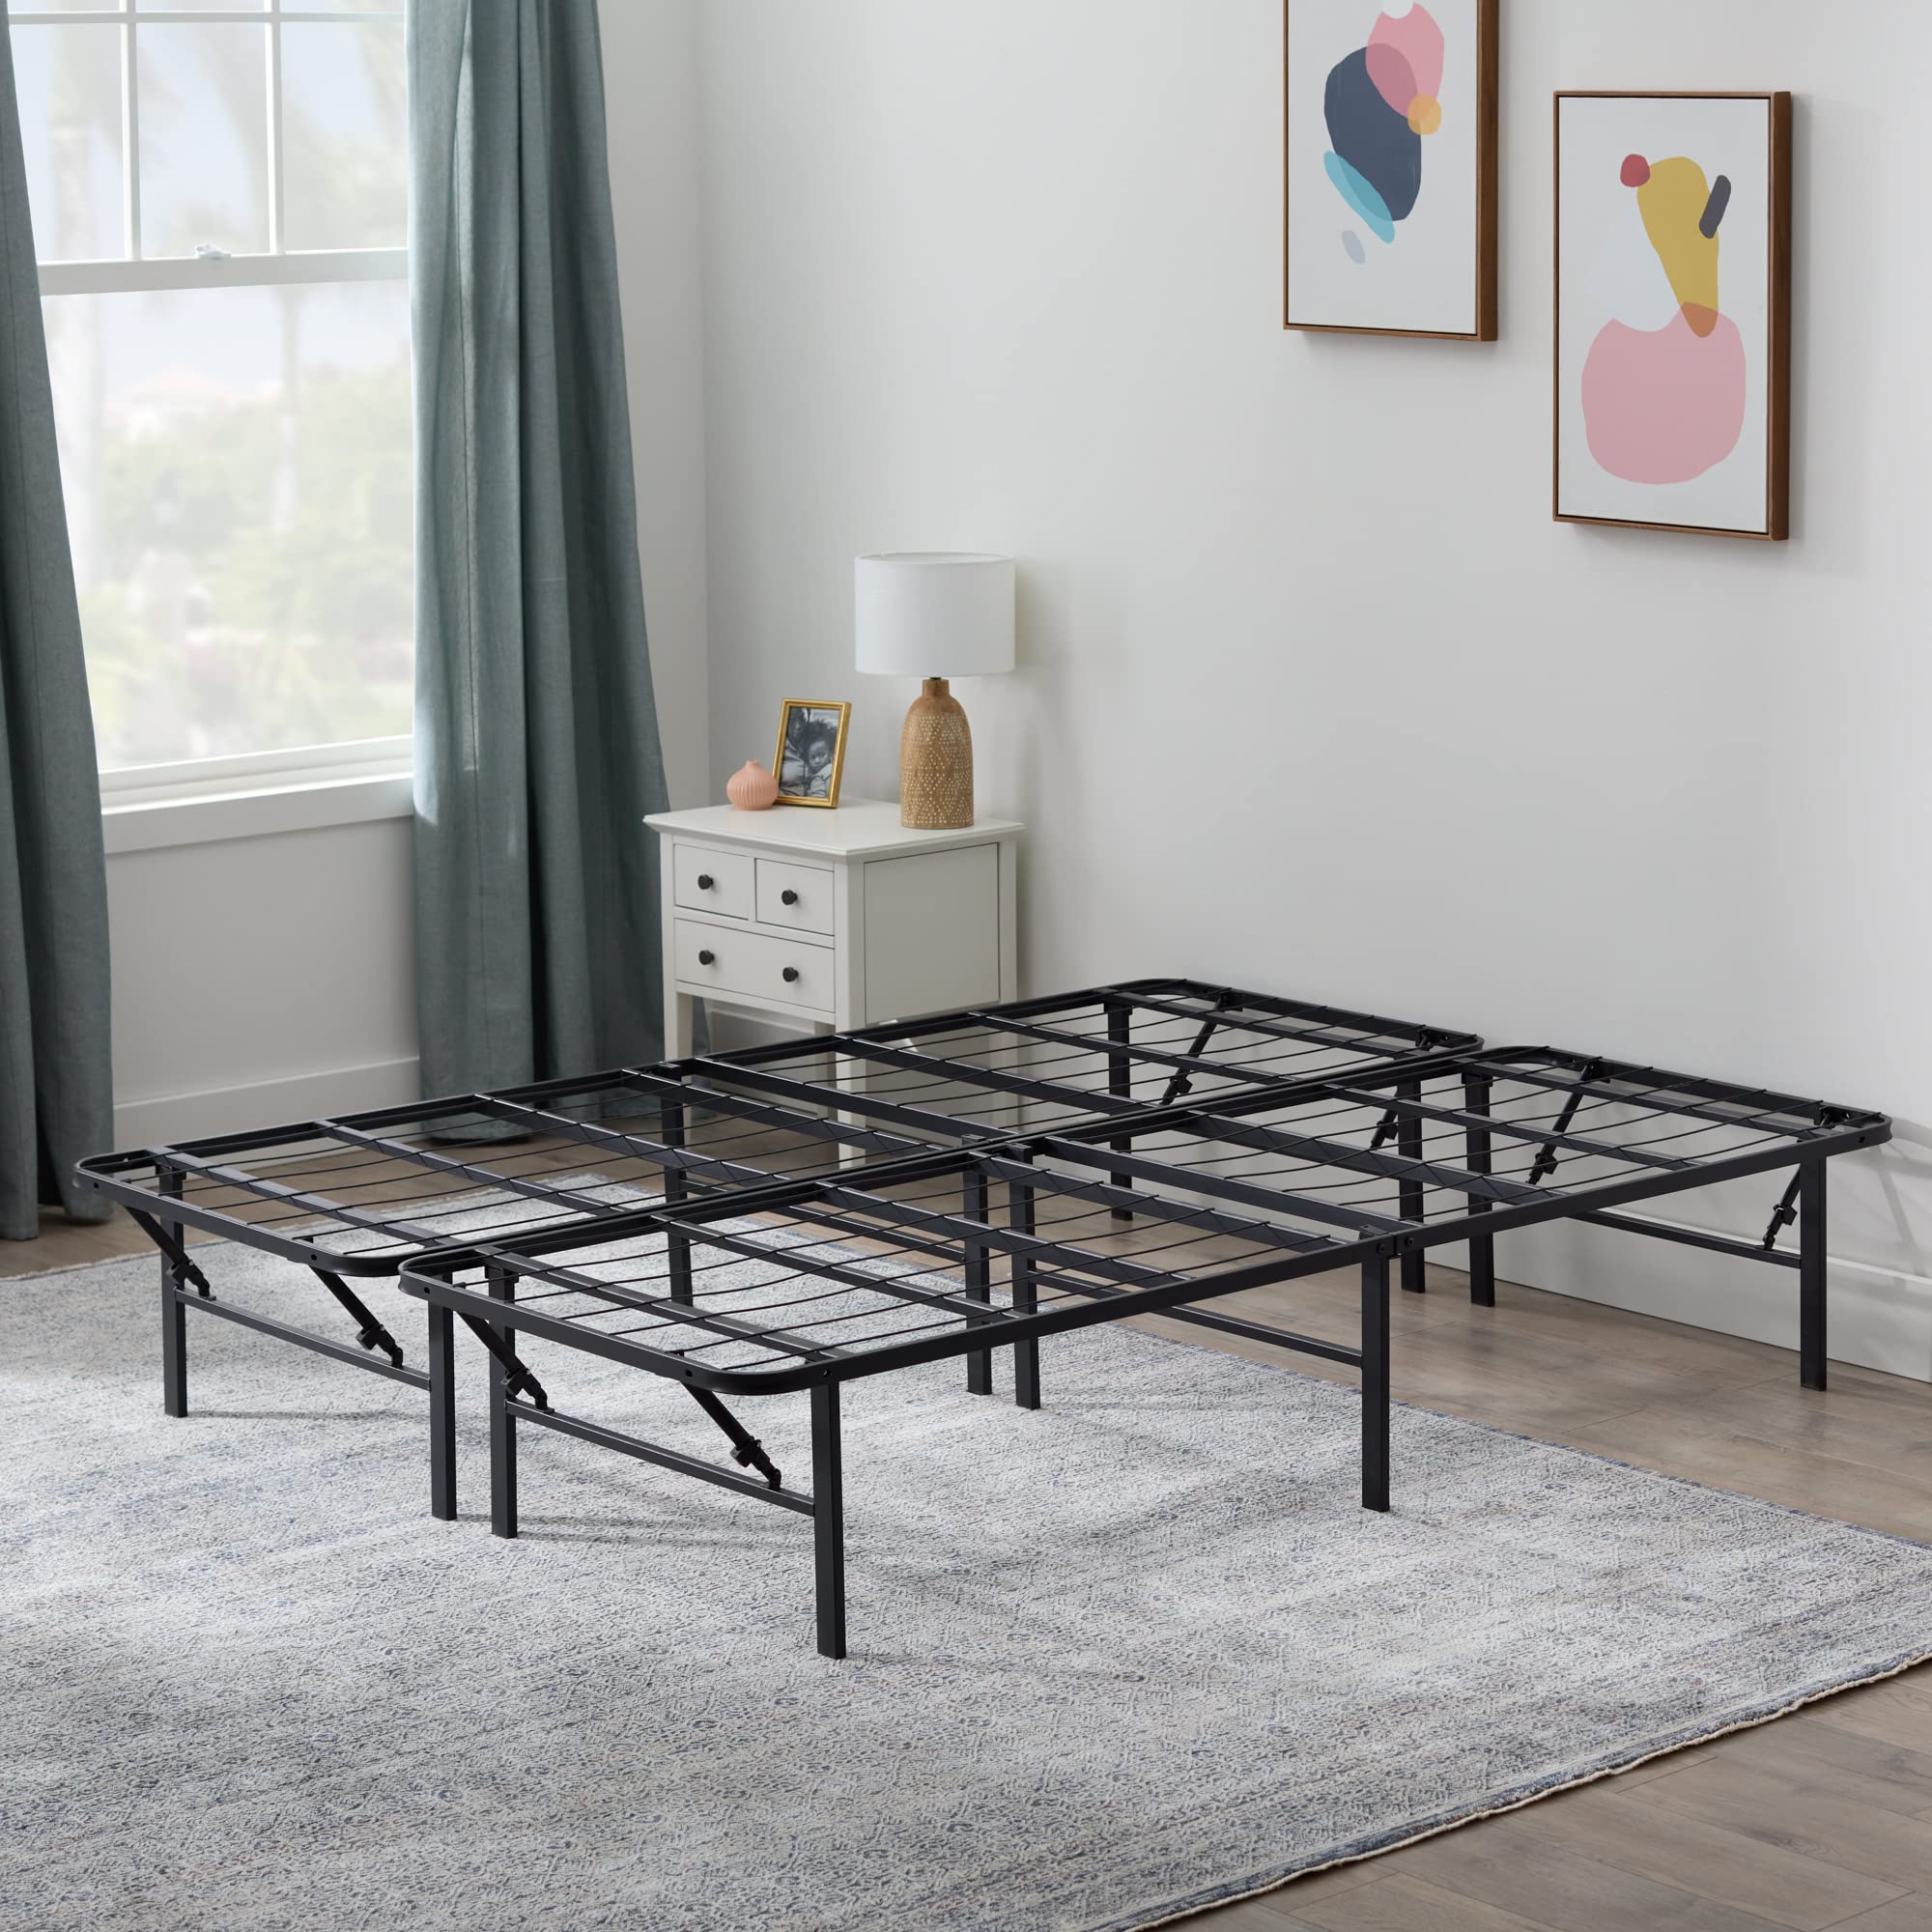 Book Cover Linenspa 14 Inch Folding Metal Platform Bed Frame - 13 Inches of Clearance - Tons of Under Bed Storage - Heavy Duty Construction - 5 Minute Assembly - Twin XL Twin XL Traditional